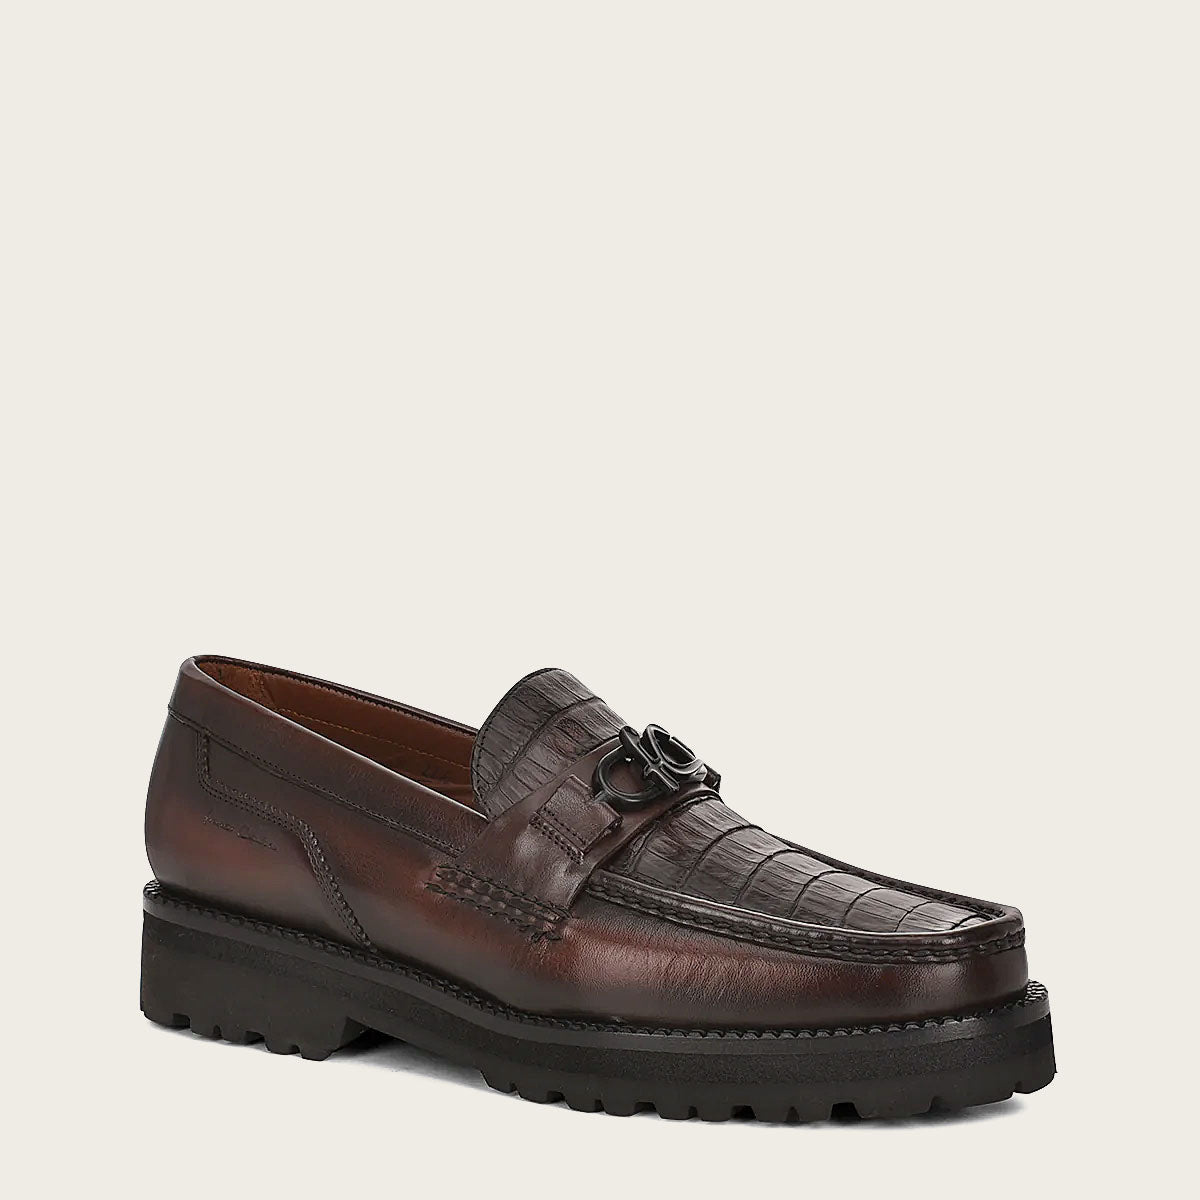 Brown leather men loafer, Cayman leather and bovine leather